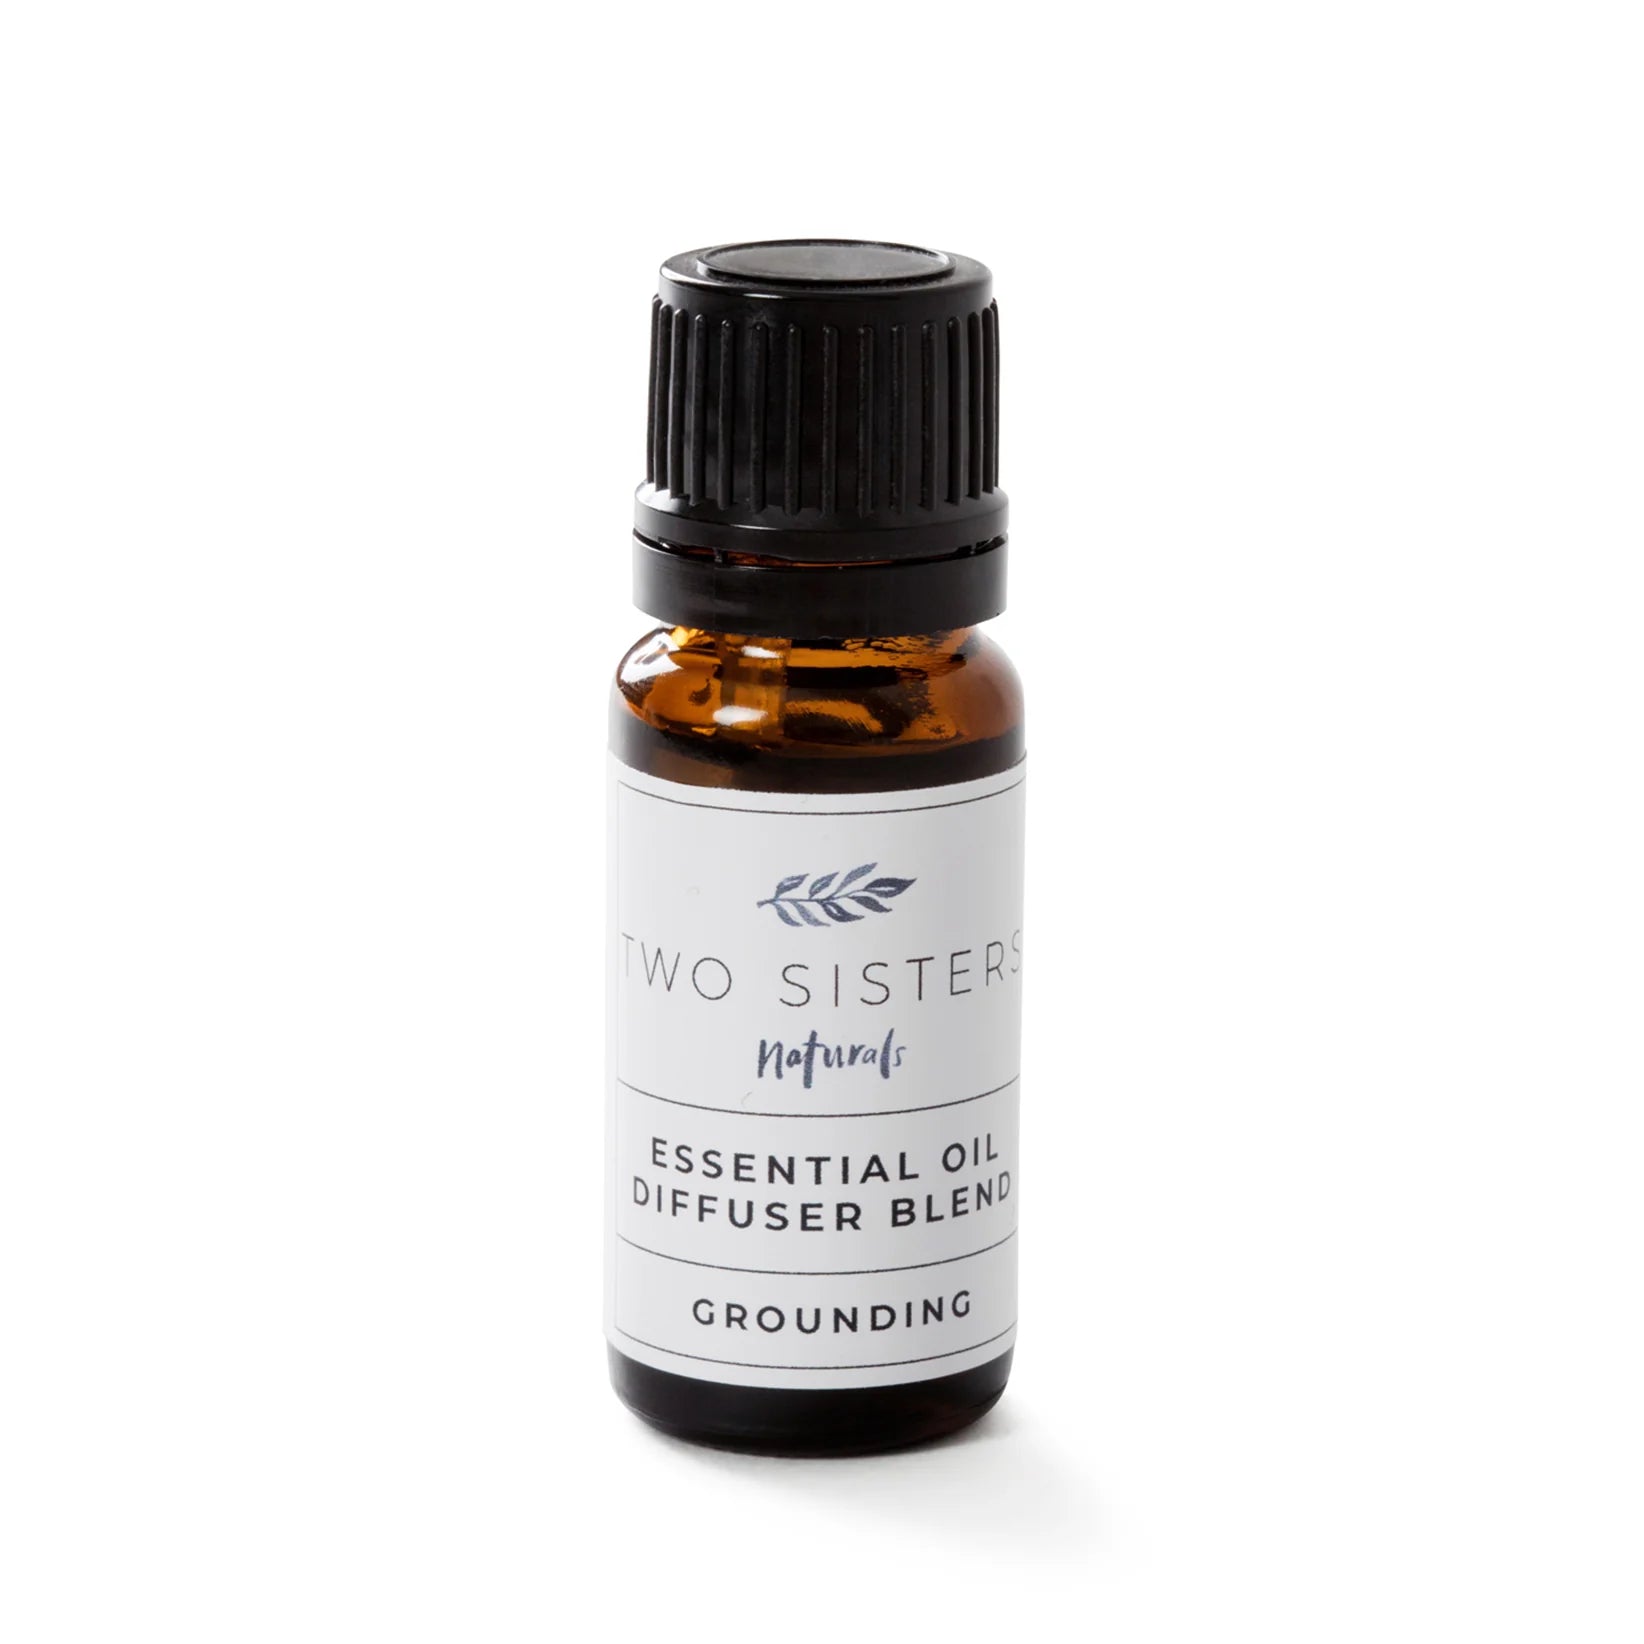 Two Sisters - Essential Oils